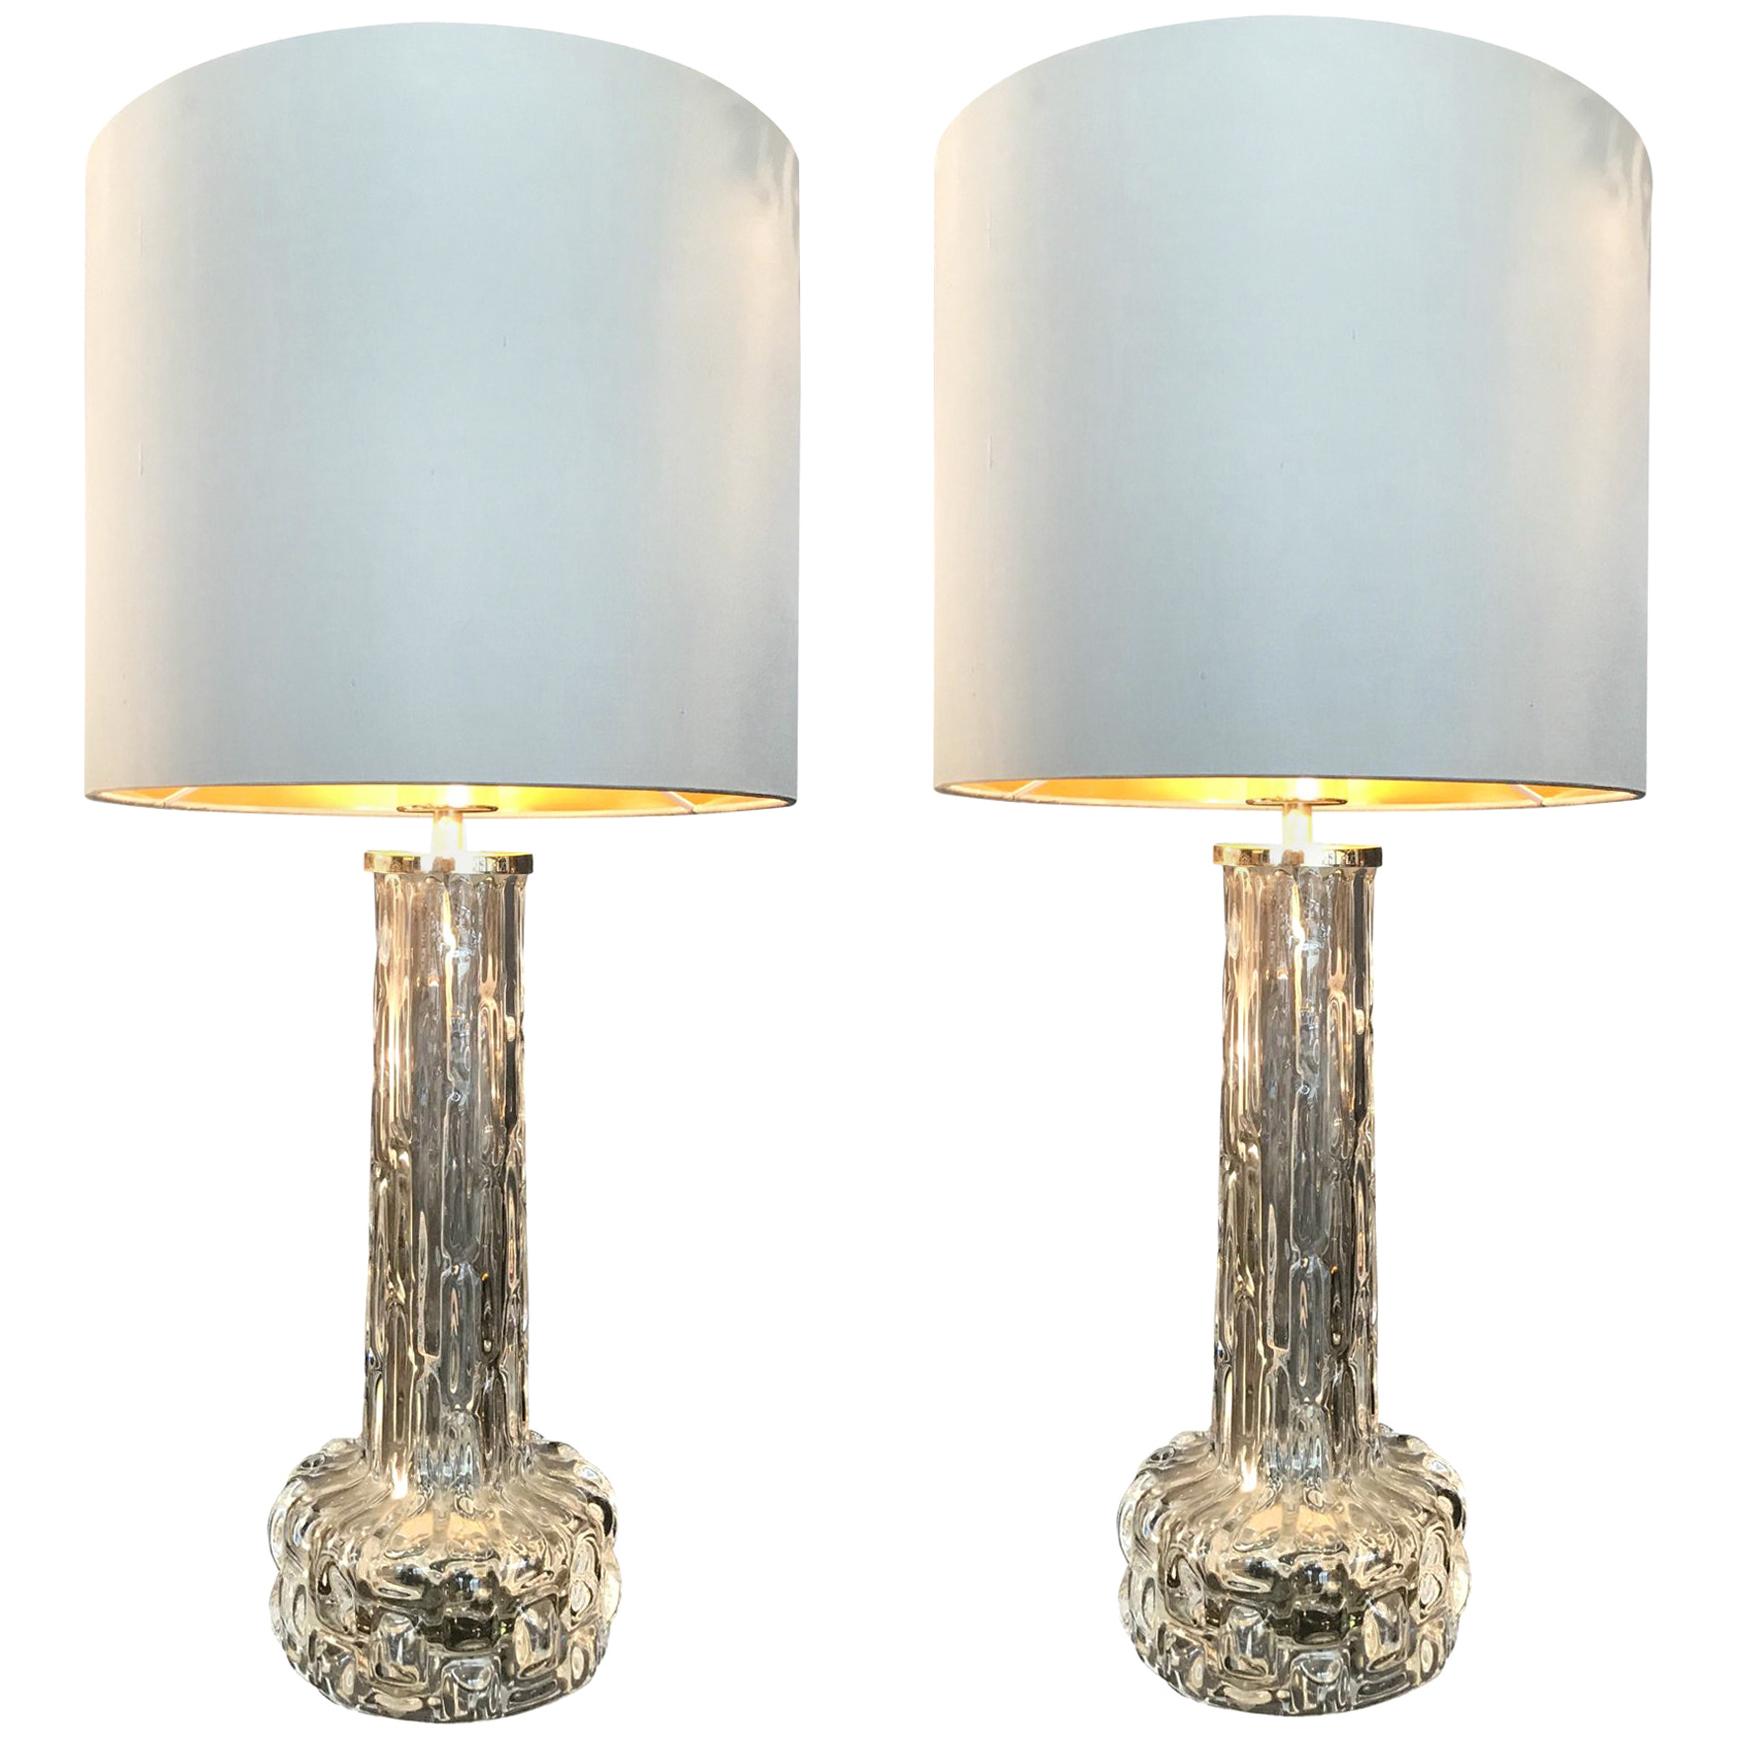 Pair of Swedish Glass Lamps by Orrefors with Nickel Fittings